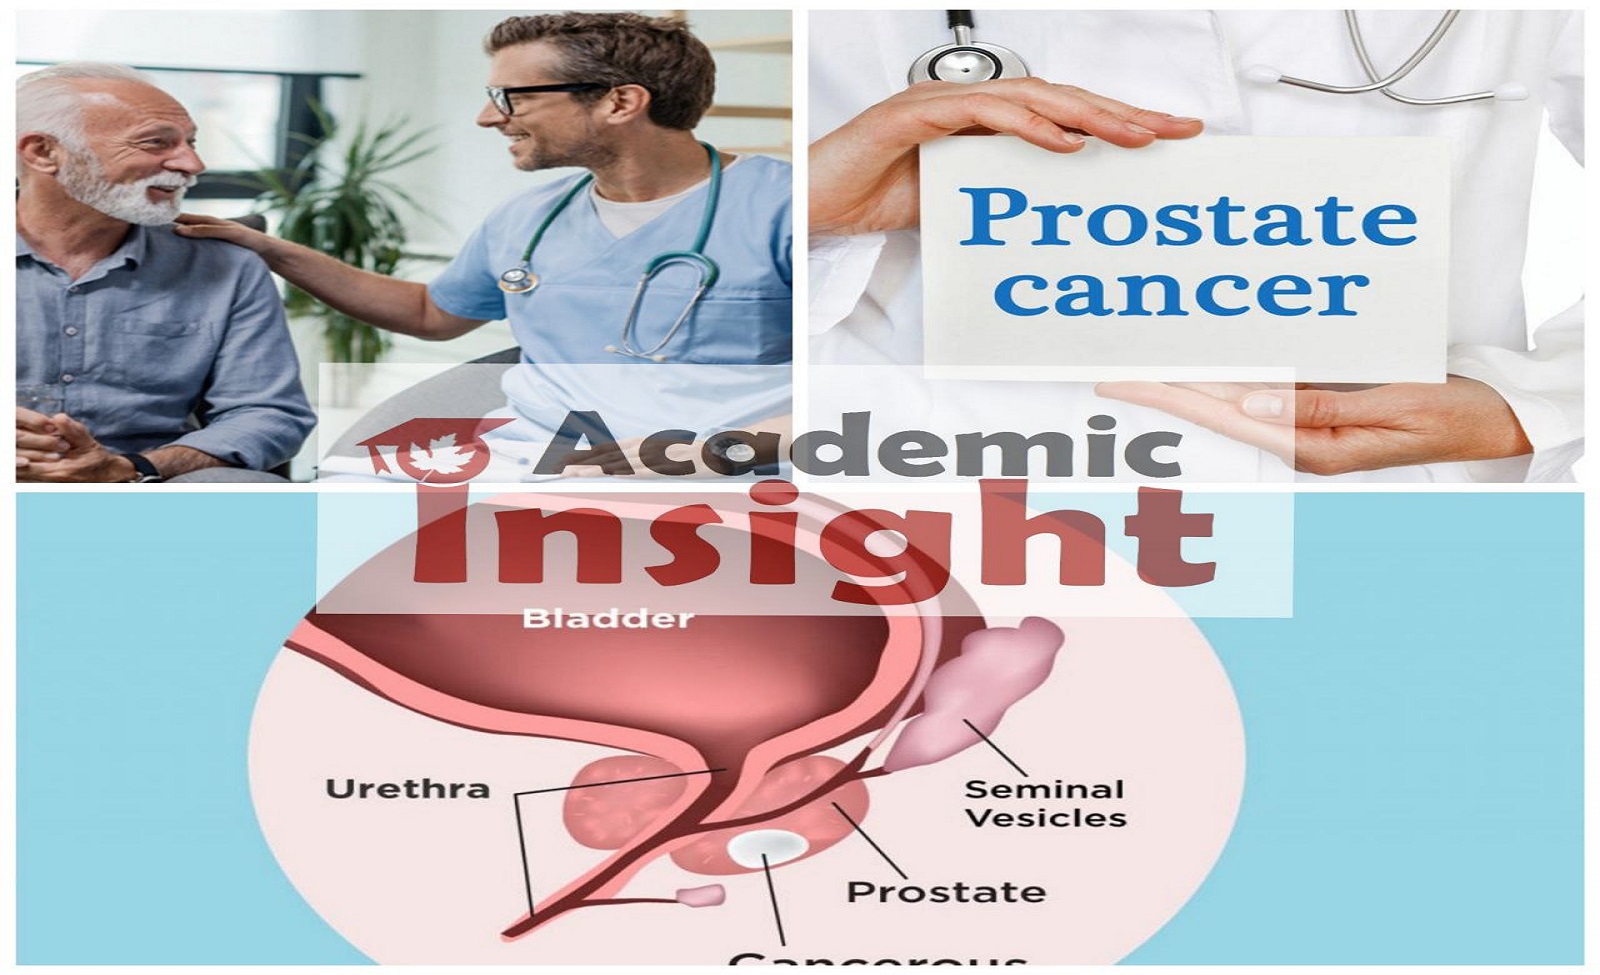 What are the prostate Cancer Risk Factors?